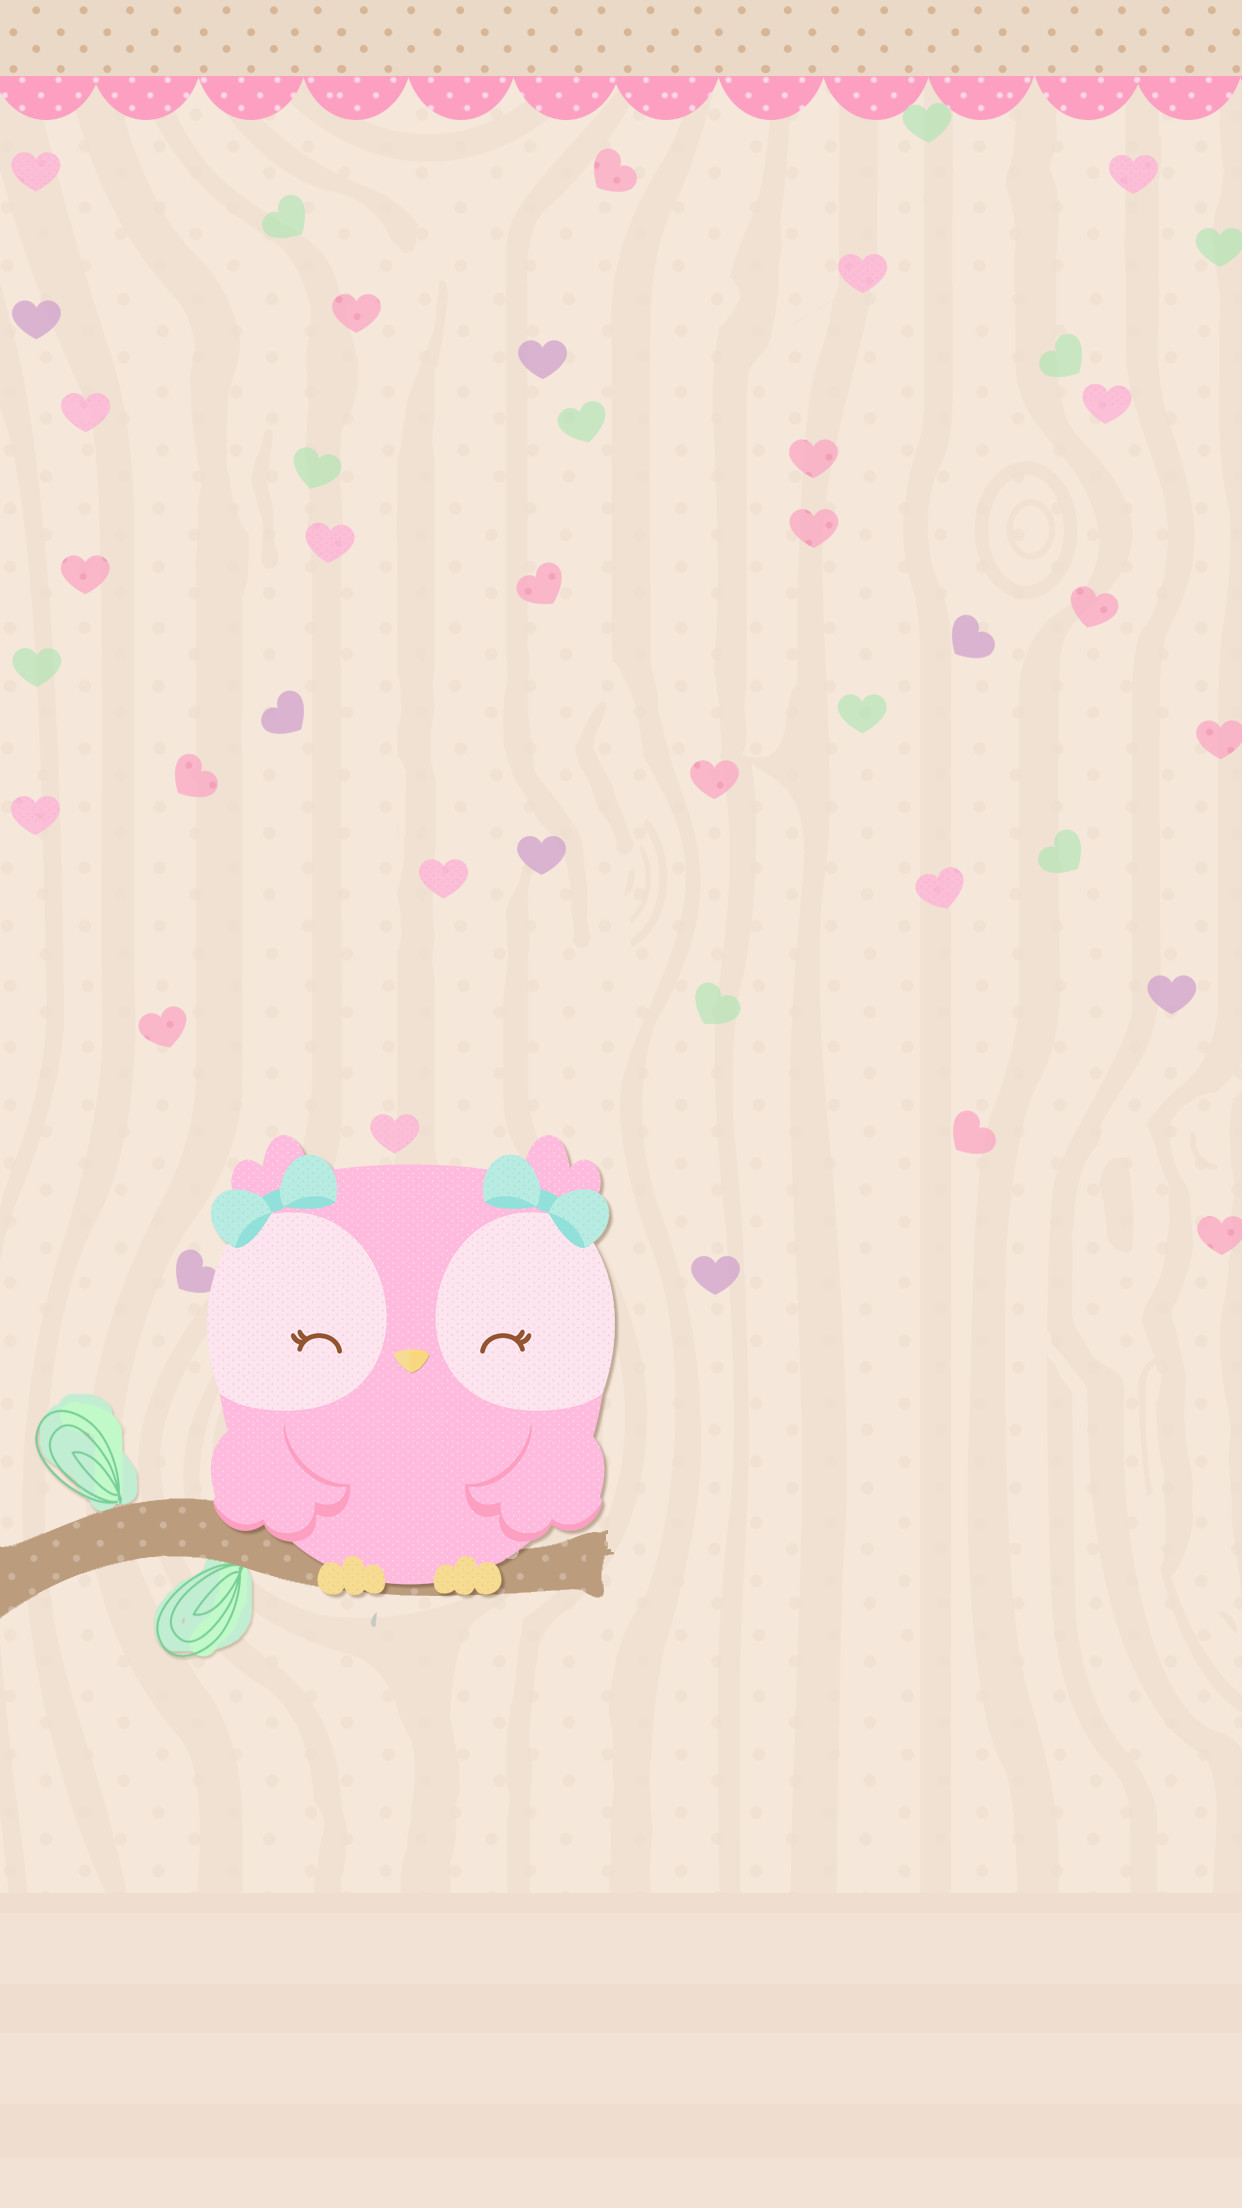 1242x2208 Owl School, Pastel Walls, Owl Wallpaper, Phone Backgrounds, Iphone  Wallpapers, Hello Kitty, Samsung, Android, Kawaii. "